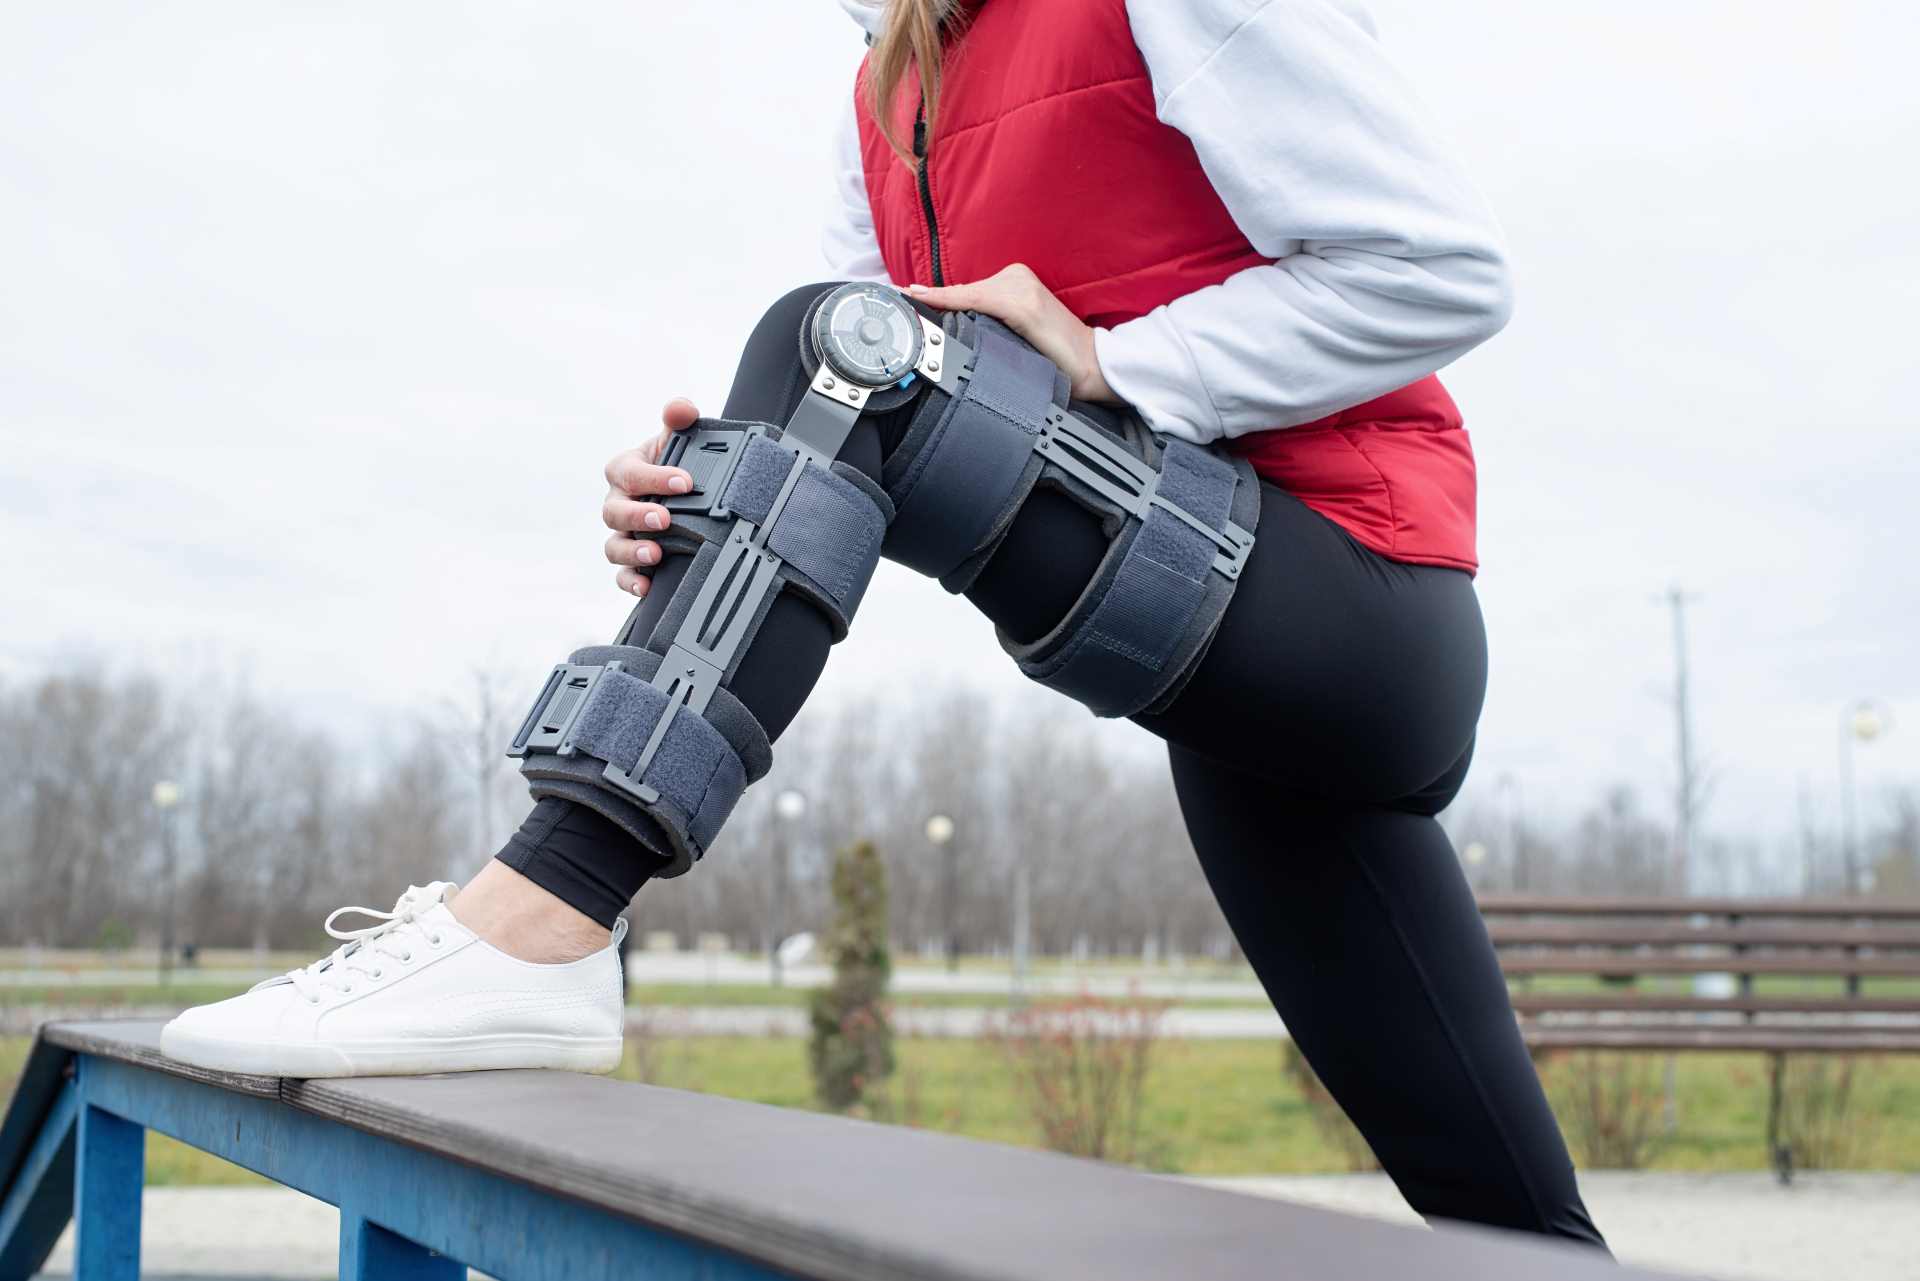 Woman stretching leg with knee brace on | Featured image for Recovering from Knee Injury blog for Refine Health Group.